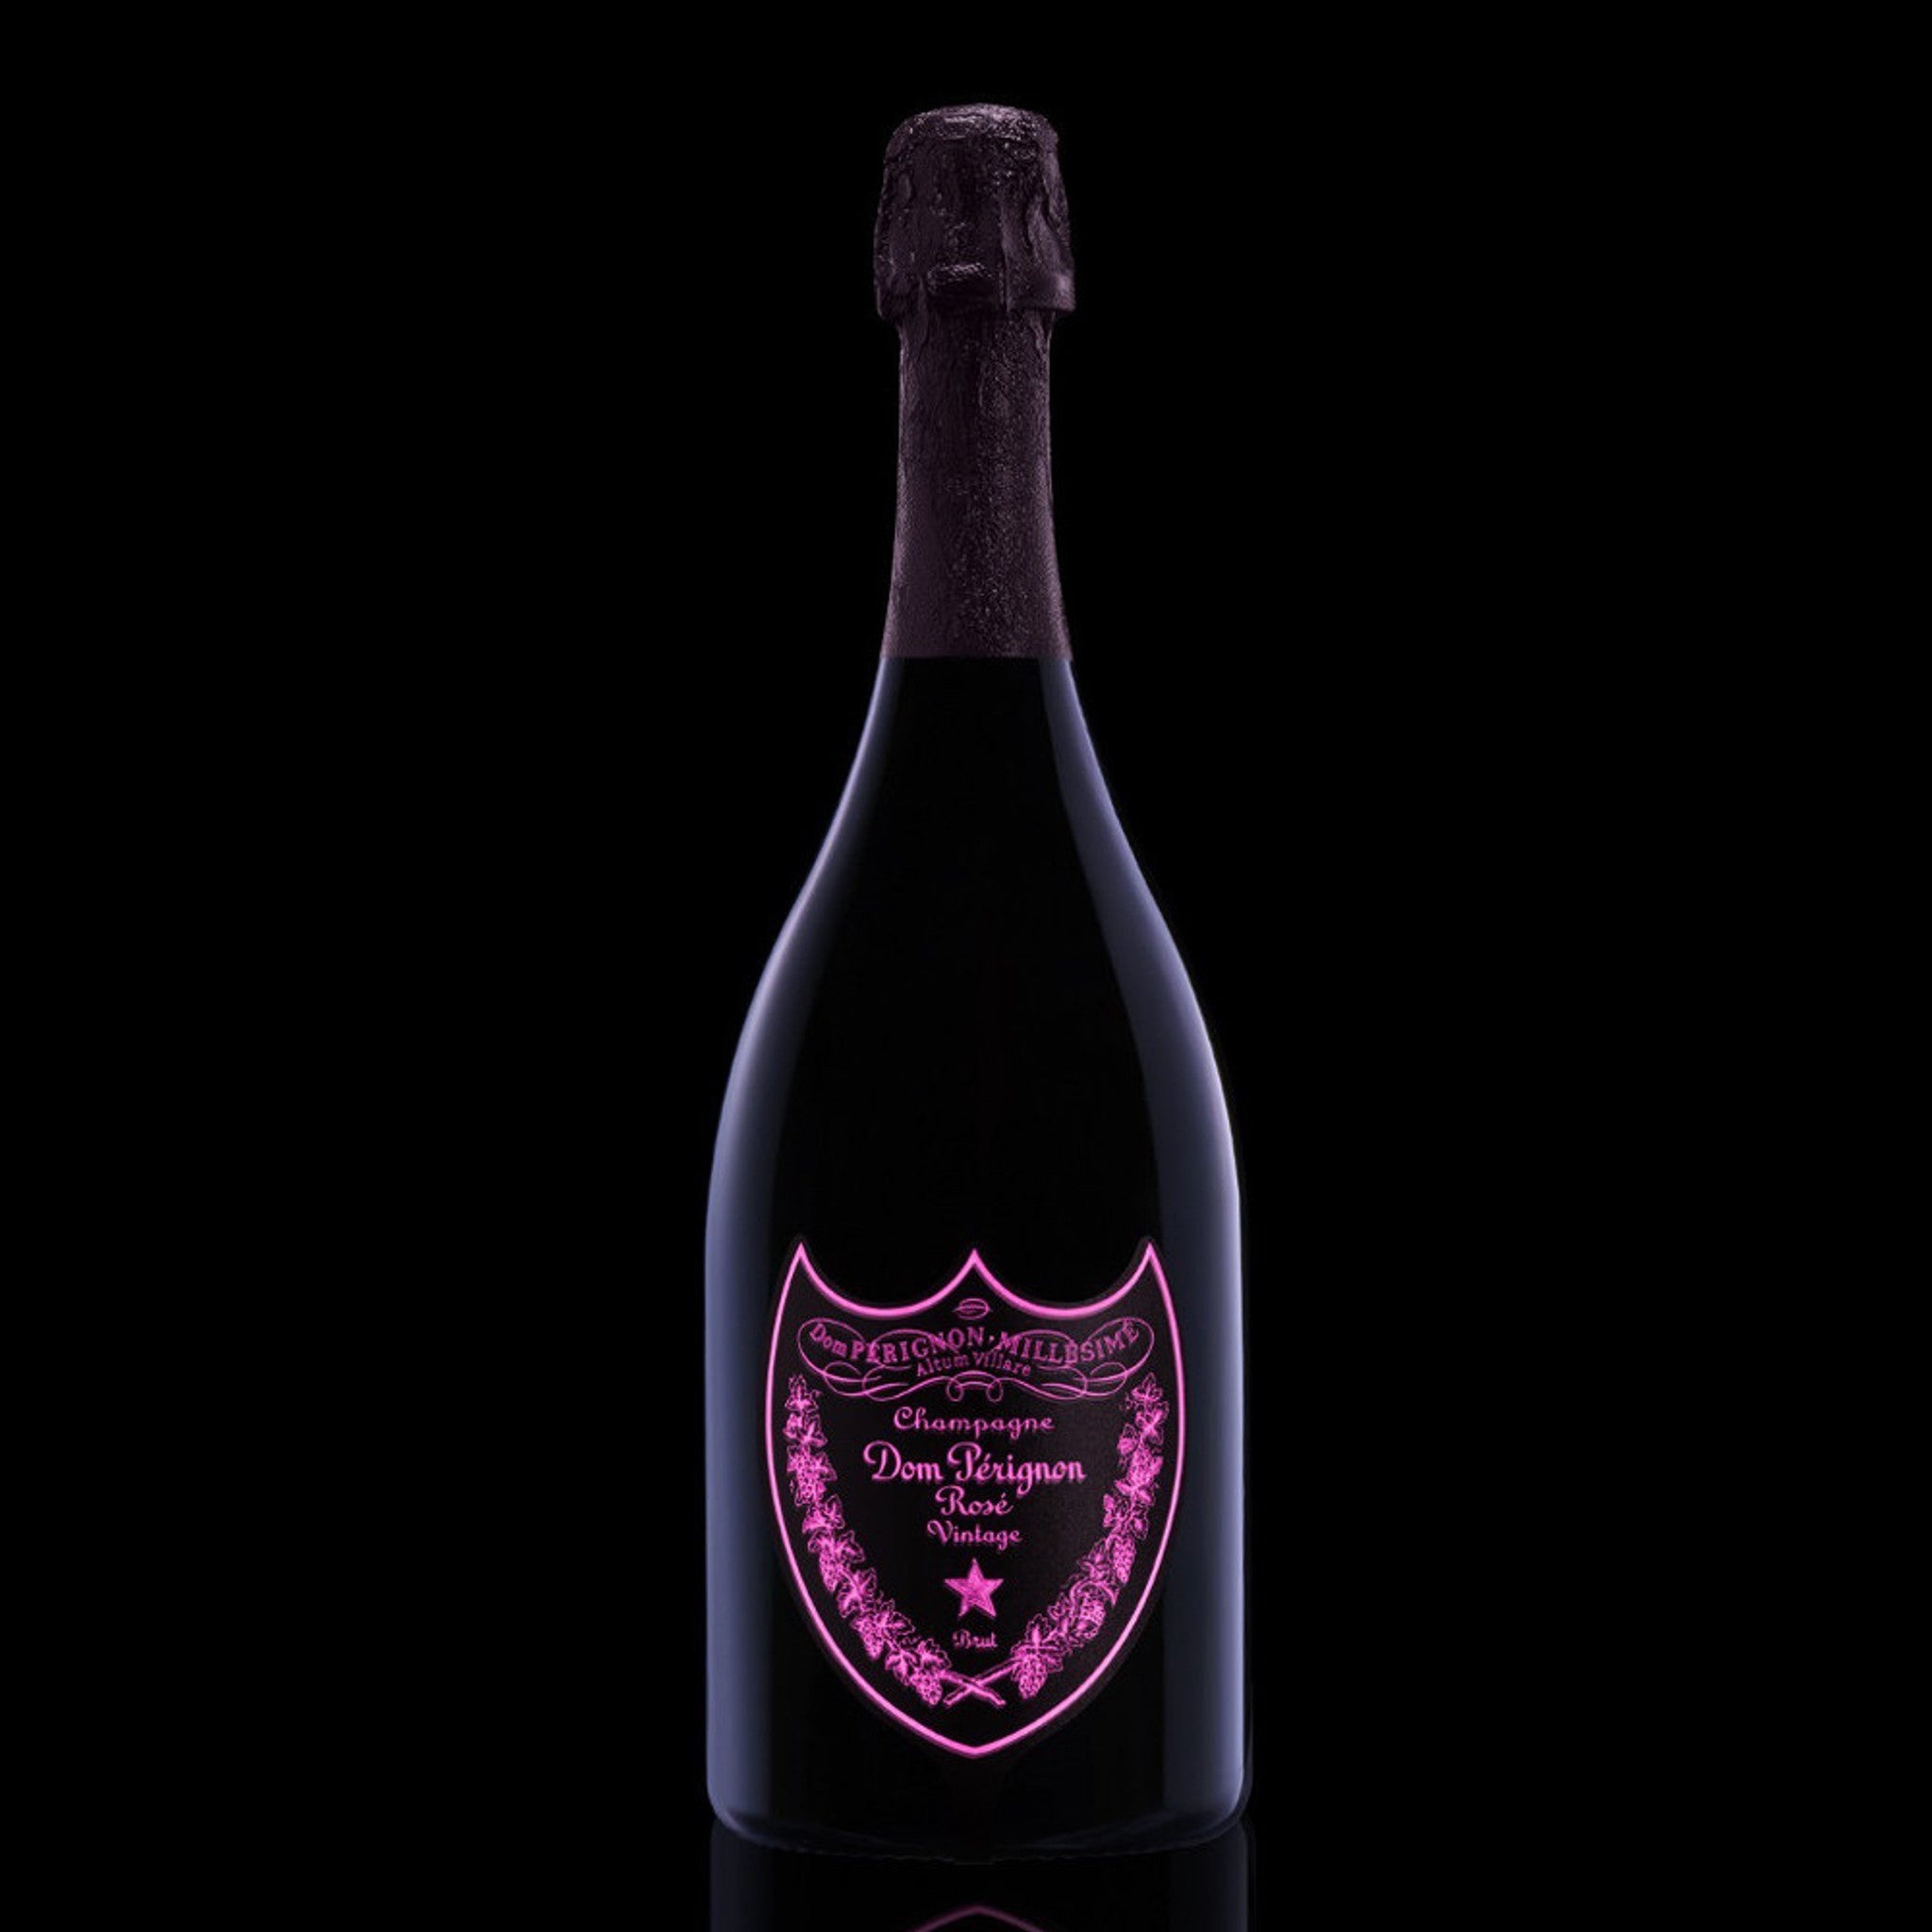 15 Things You Should Know About Dom Pérignon Champagne